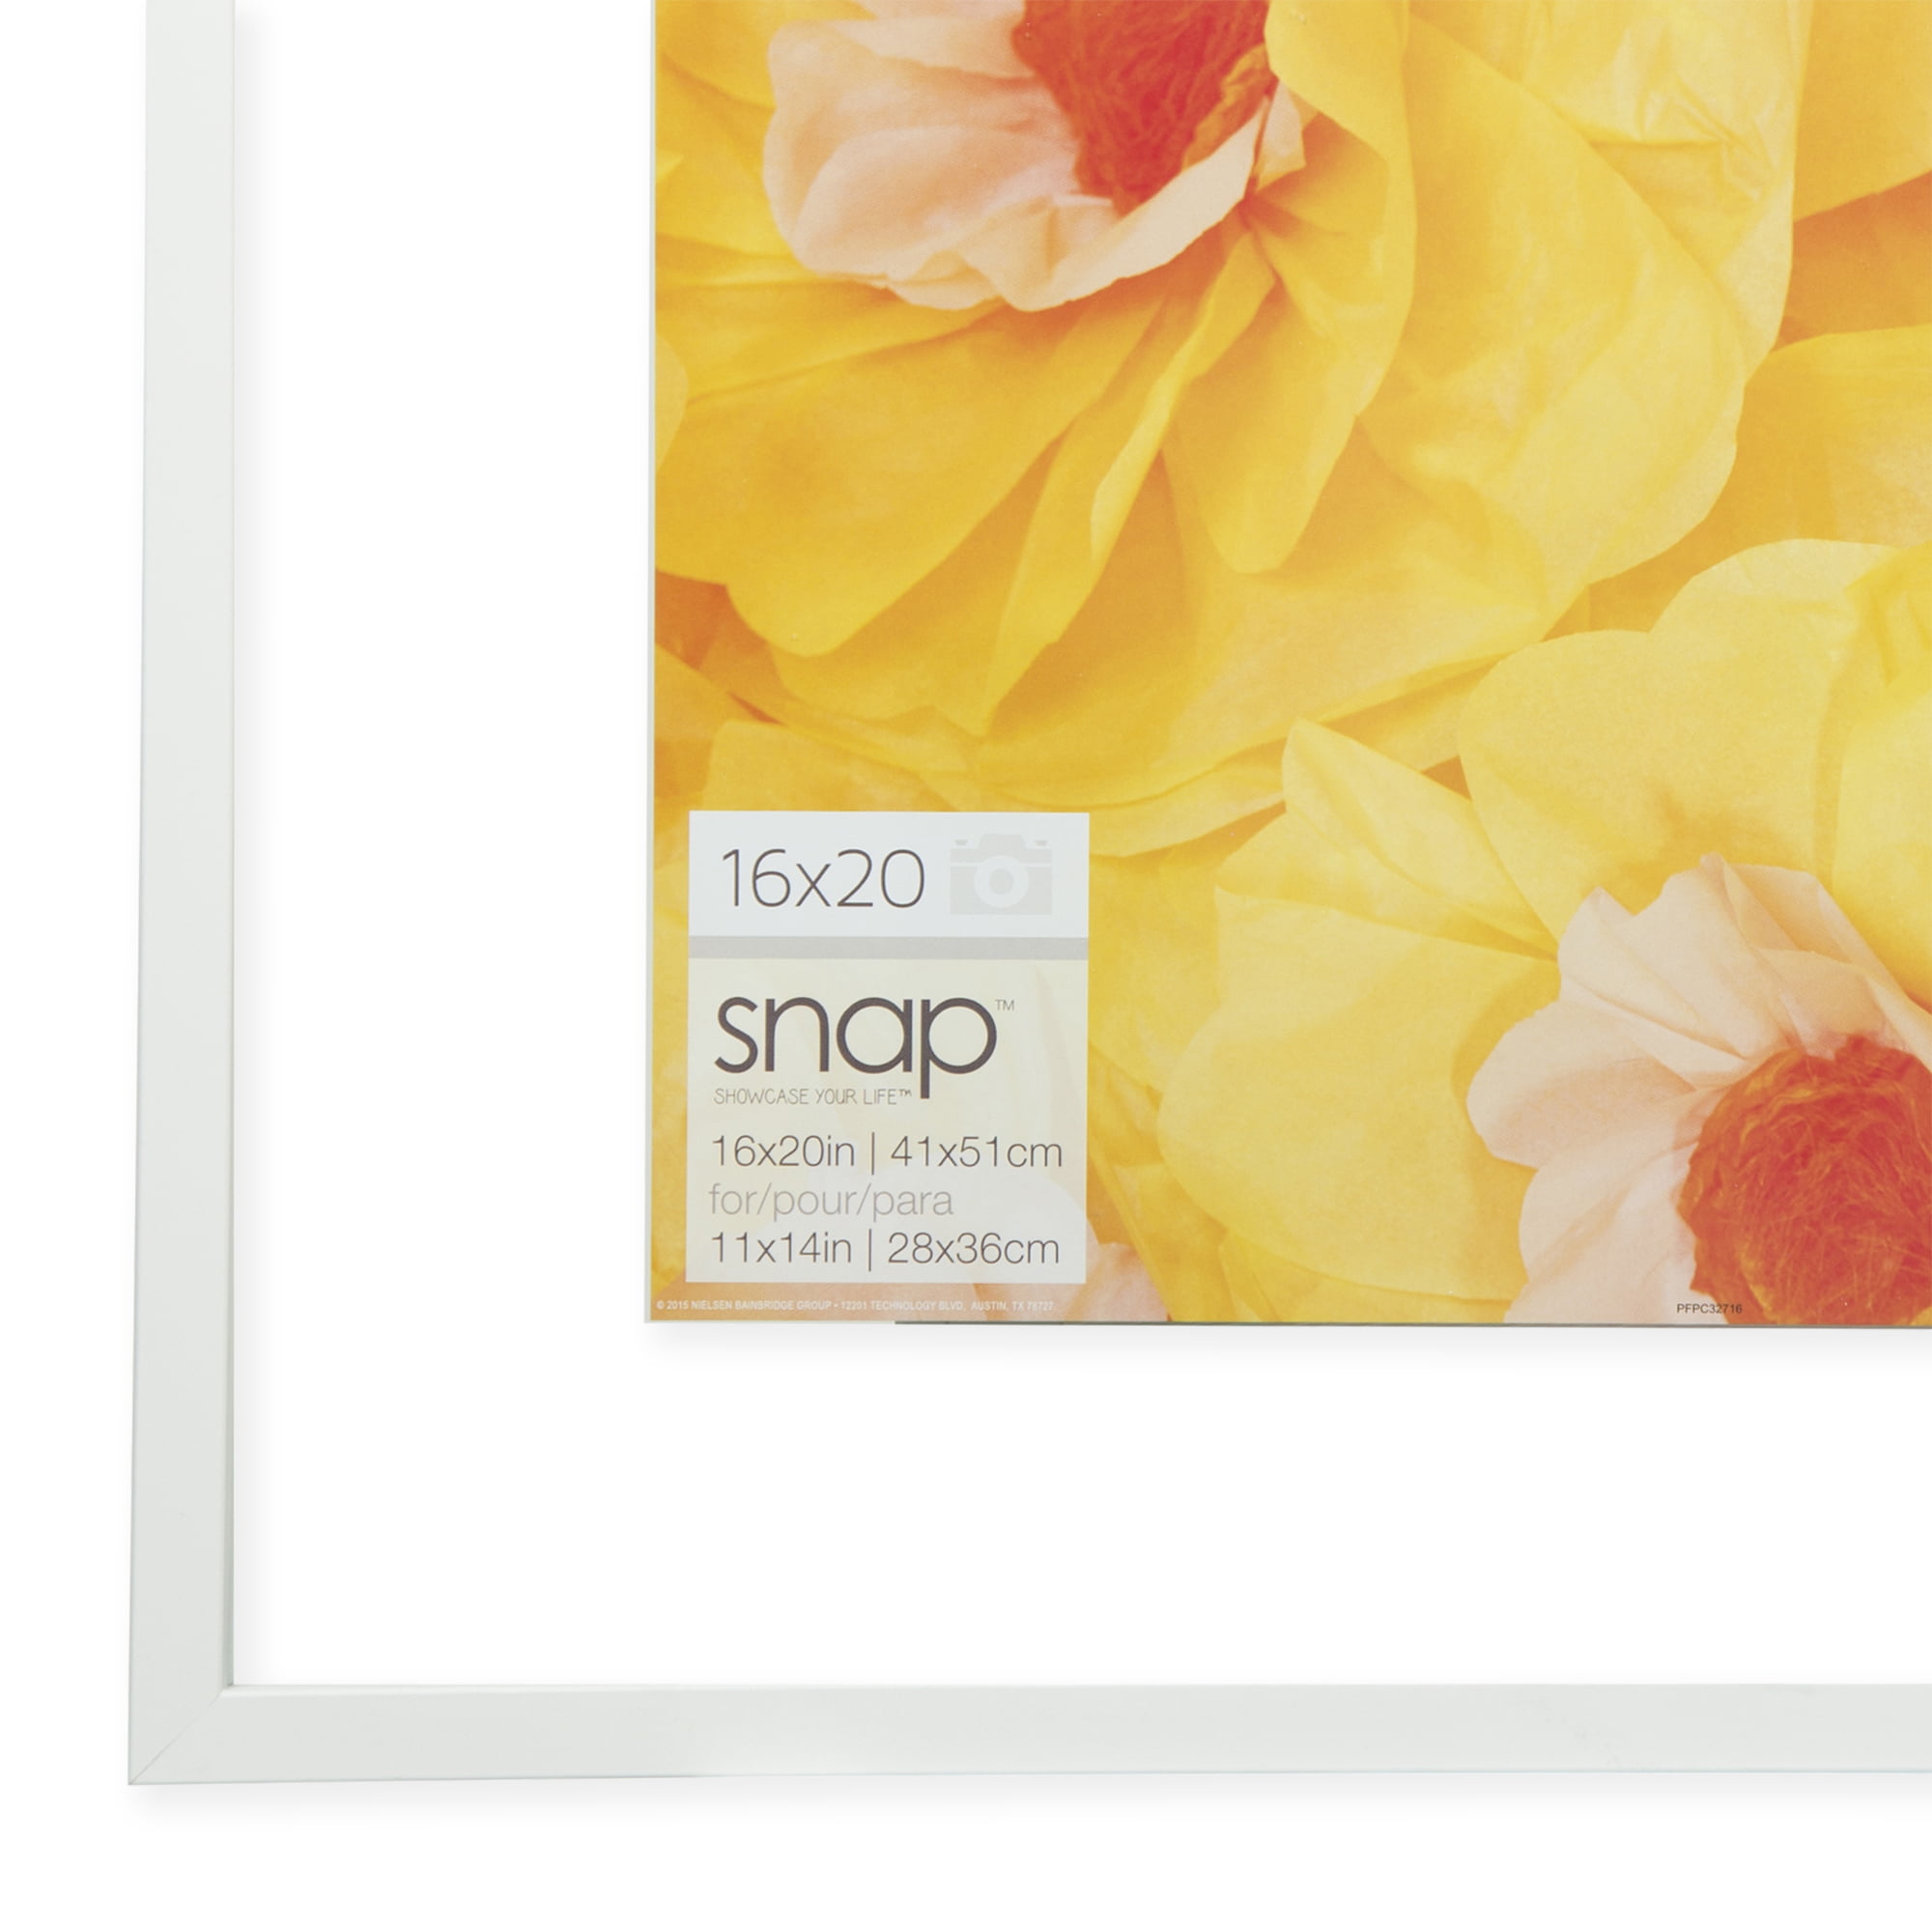 Snap 16x20 Float Frame For Floating Display of 11x14 Image, White